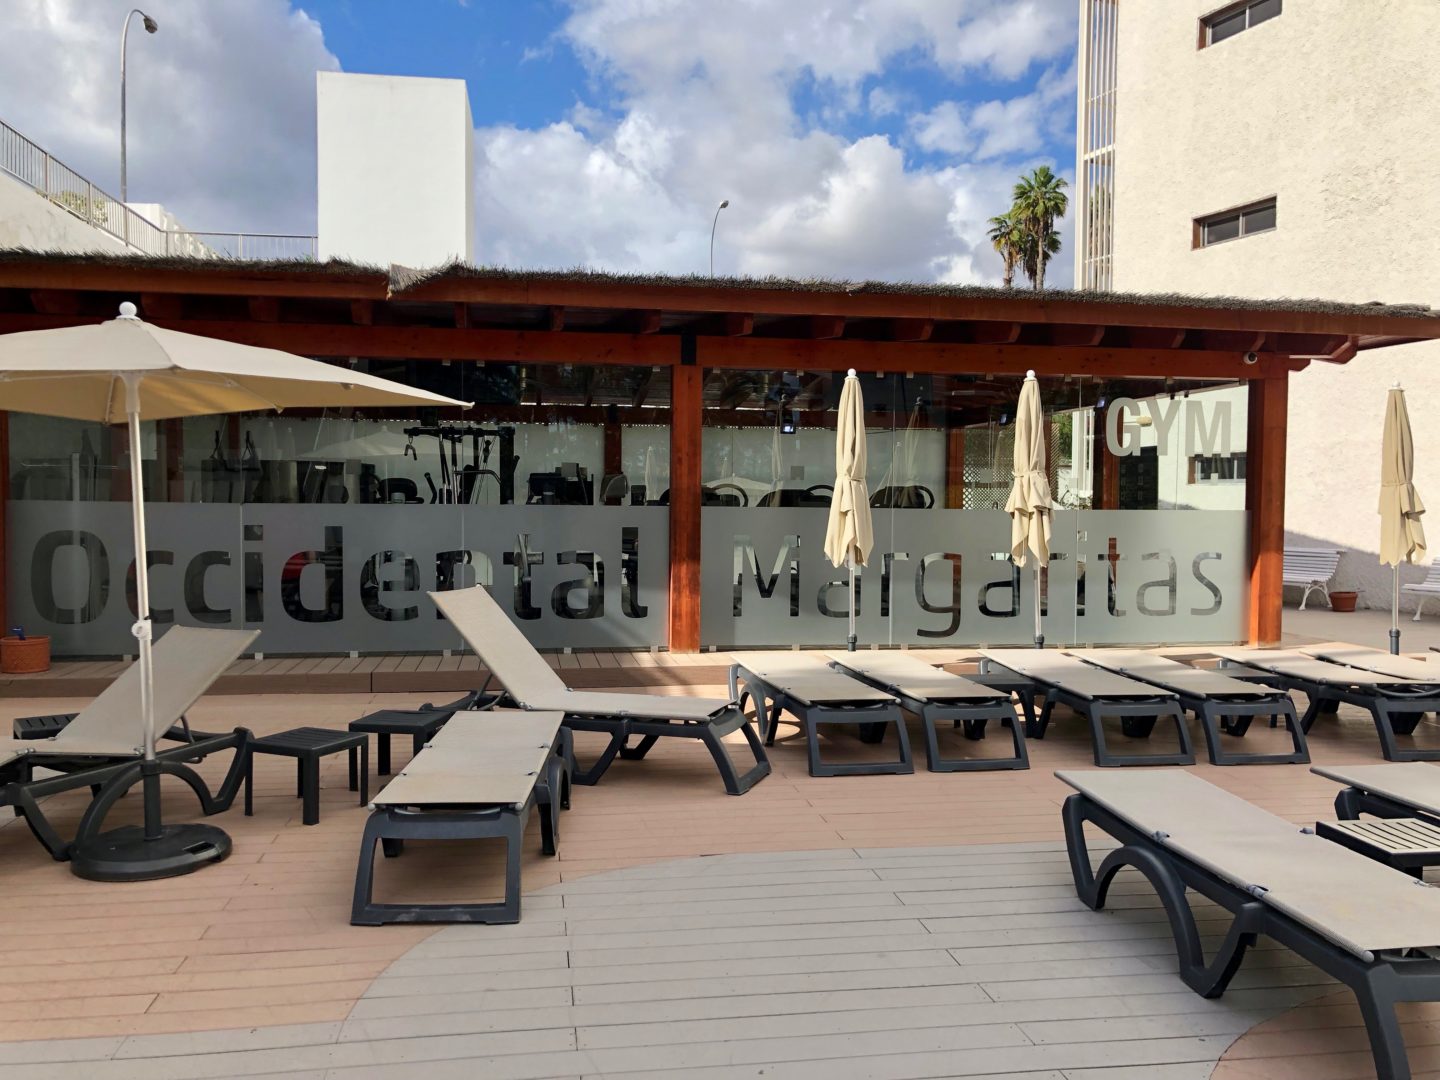 Occidental Margaritas, Gran Canaria, family holiday review﻿